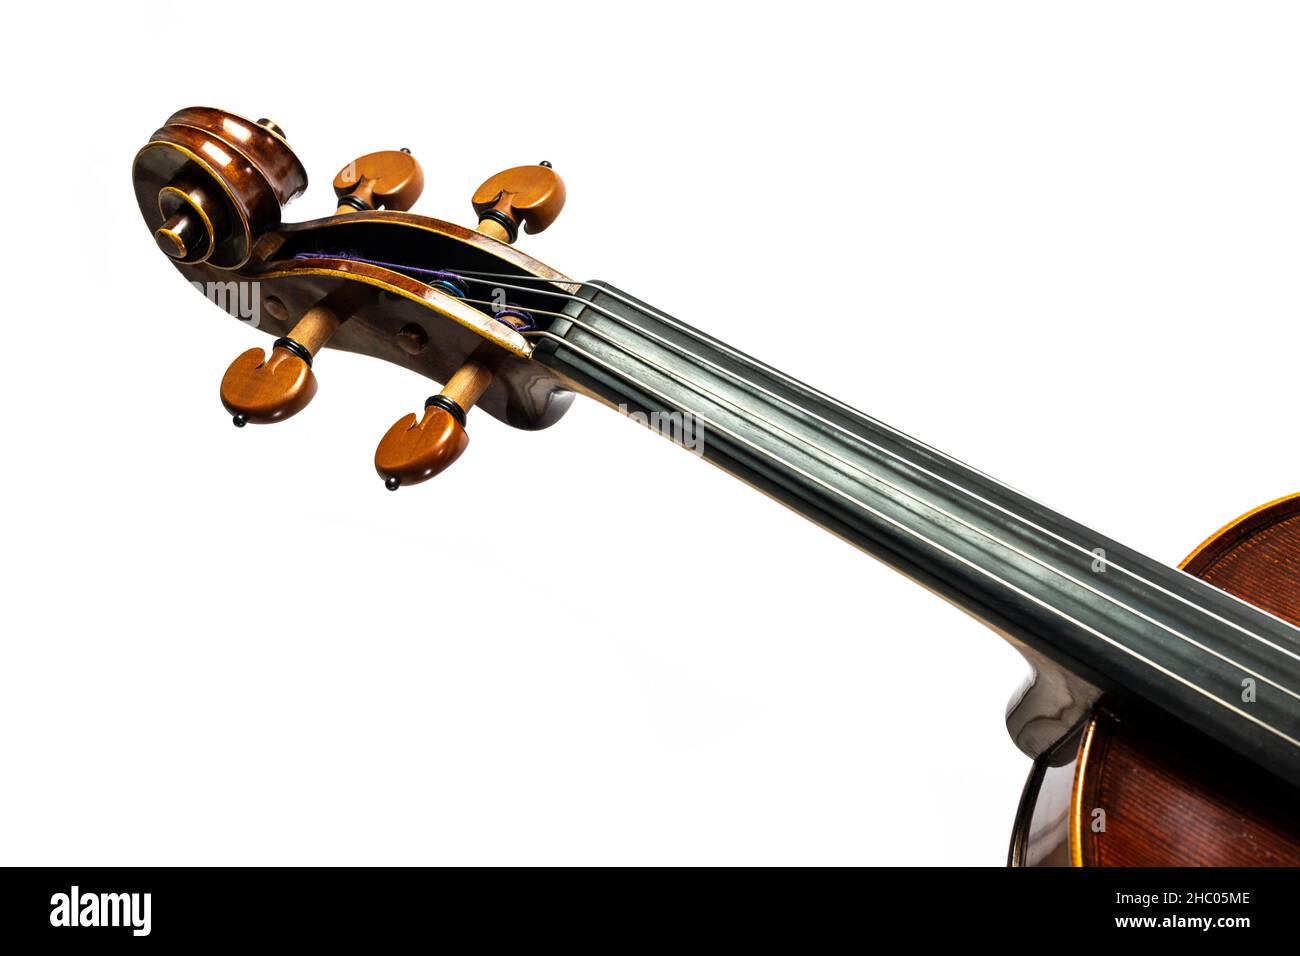 Scroll, pegbox, and fingerboard of a viola, part of the musical string instrument from the viol family, isolated on a white background, copy space Stock Photo